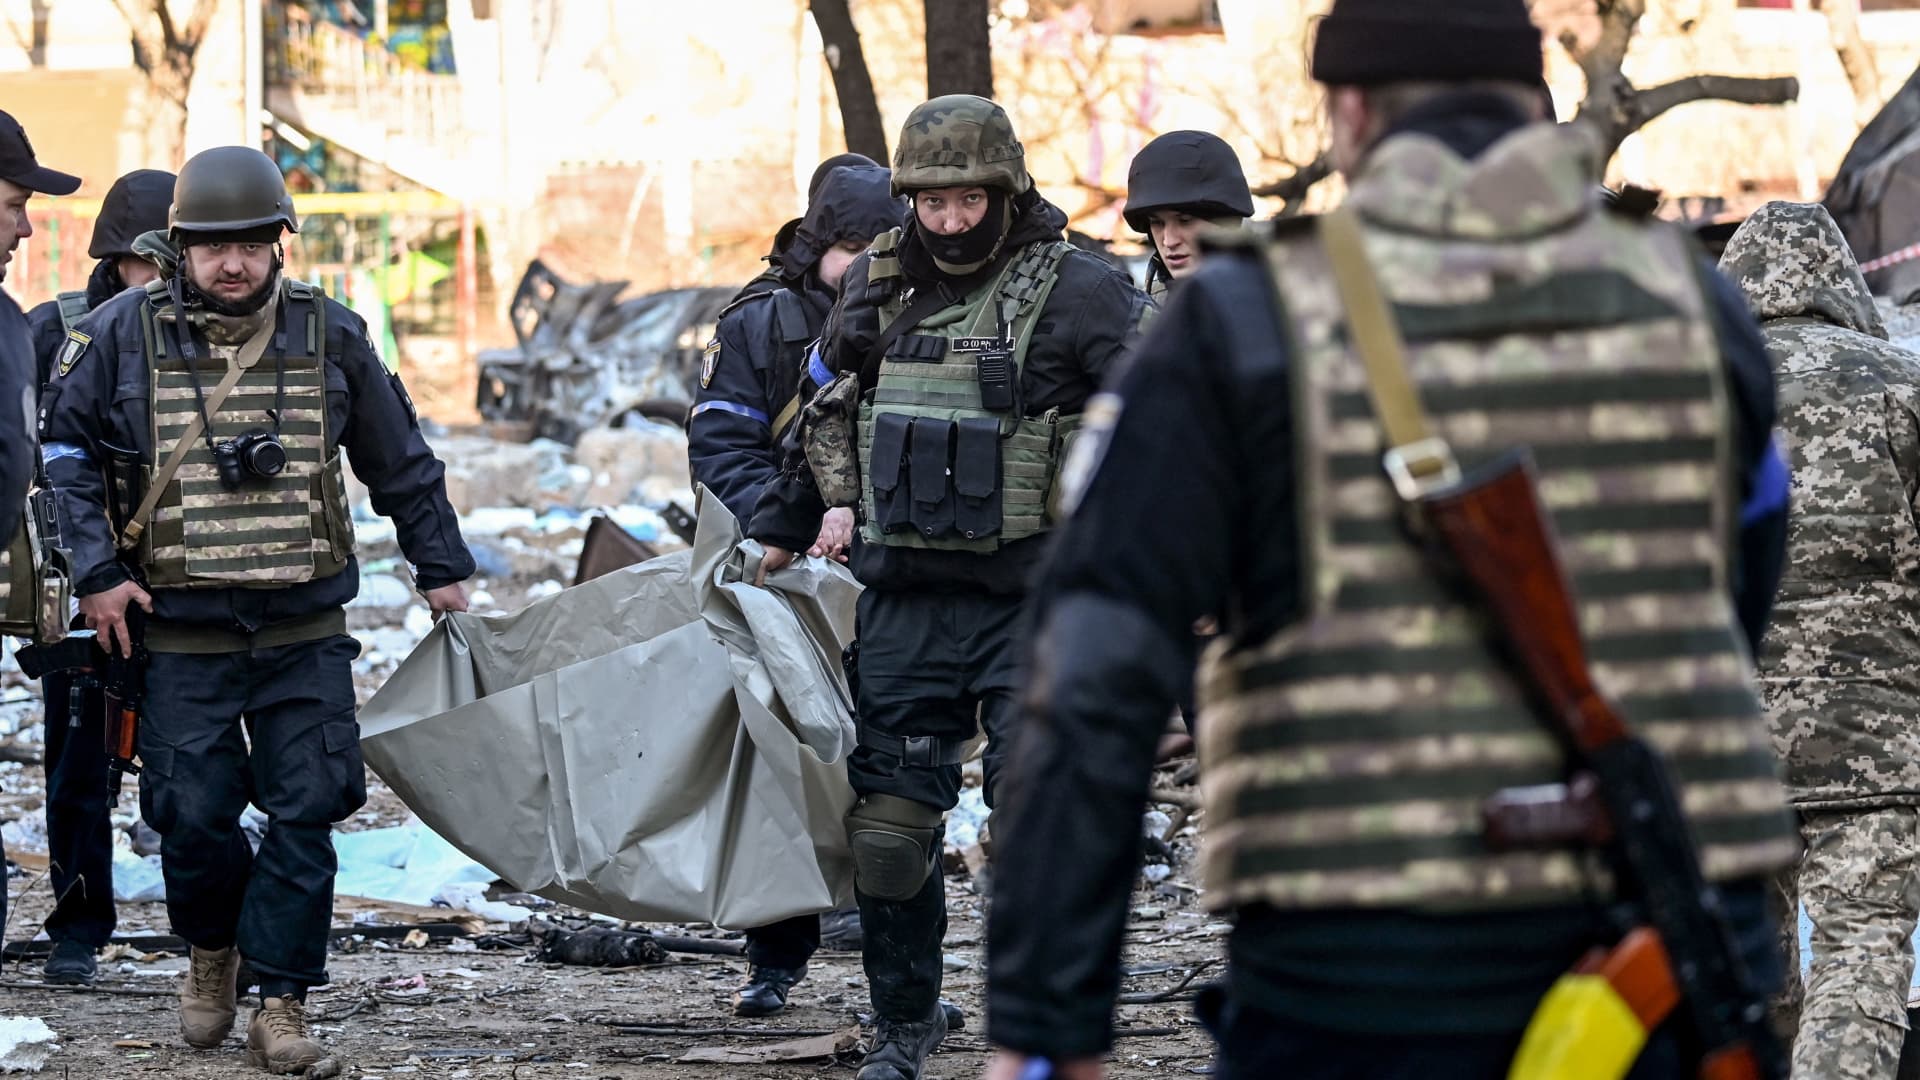 Ukrainian policemen carry a body away from a five-storey residential building that partially collapsed after a shelling in Kyiv on March 18, 2022, as Russian troops try to encircle the Ukrainian capital as part of their slow-moving offensive.